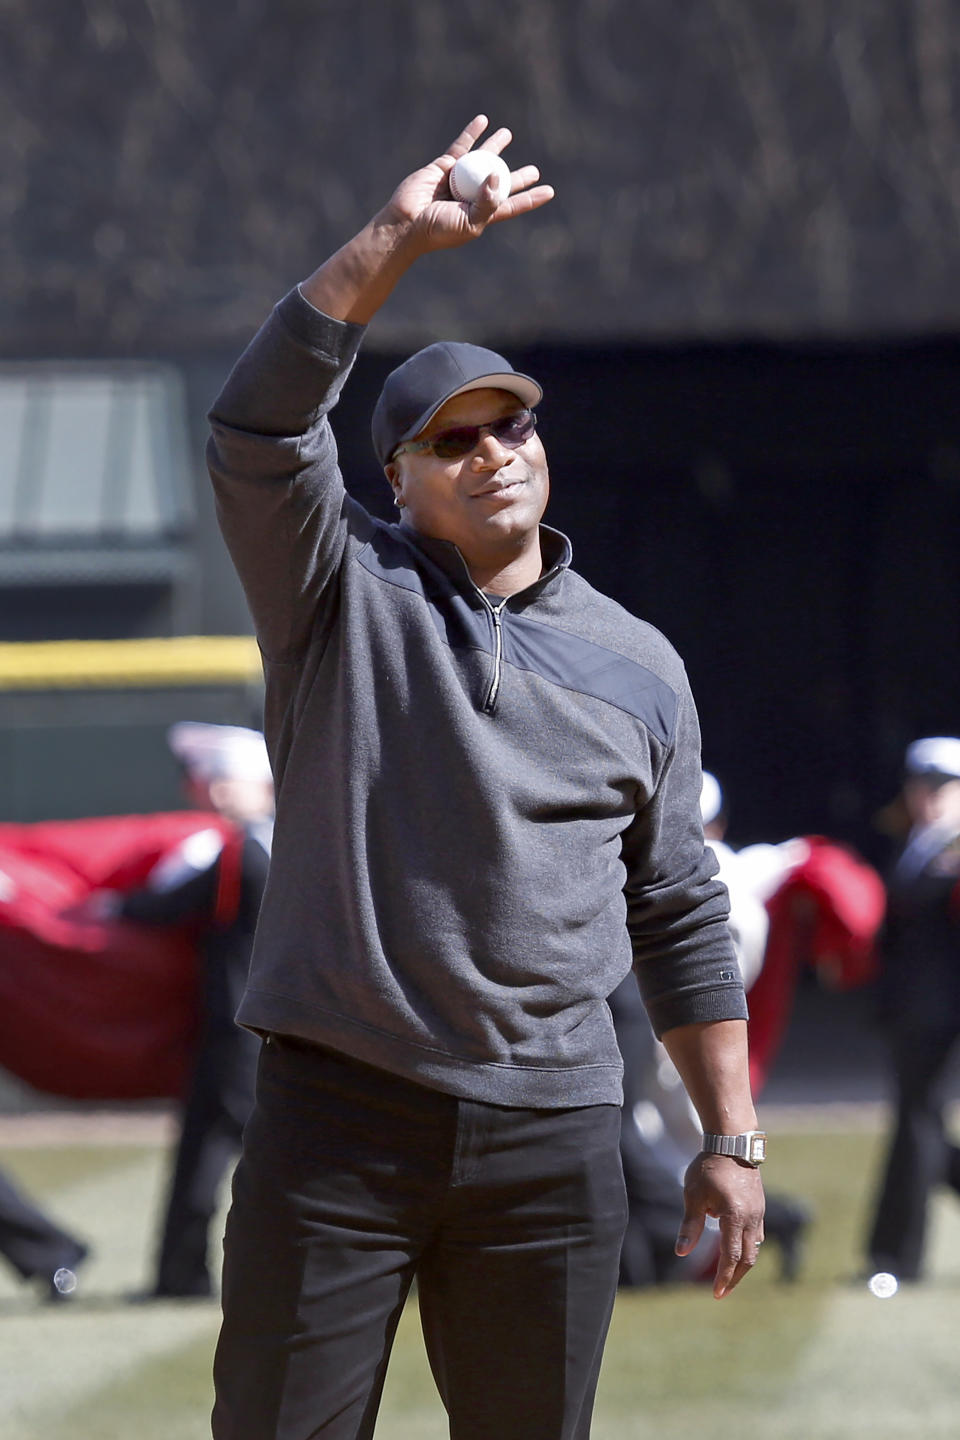 FILE - Former Chicago White Sox great Bo Jackson waves to the crowd before throwing the ceremonial first pitch before the White Sox and Kansas City Royals season opening baseball game Monday, April 1, 2013, in Chicago. Jackson helped pay for the funerals of the 19 children and two teachers killed in the Uvalde, Texas, school massacre in May 2022. The donation was previously anonymous but Jackson told The Associated Press this week he felt compelled to support the victims' families after the loss of so many children. (AP Photo/Charles Rex Arbogast, File)